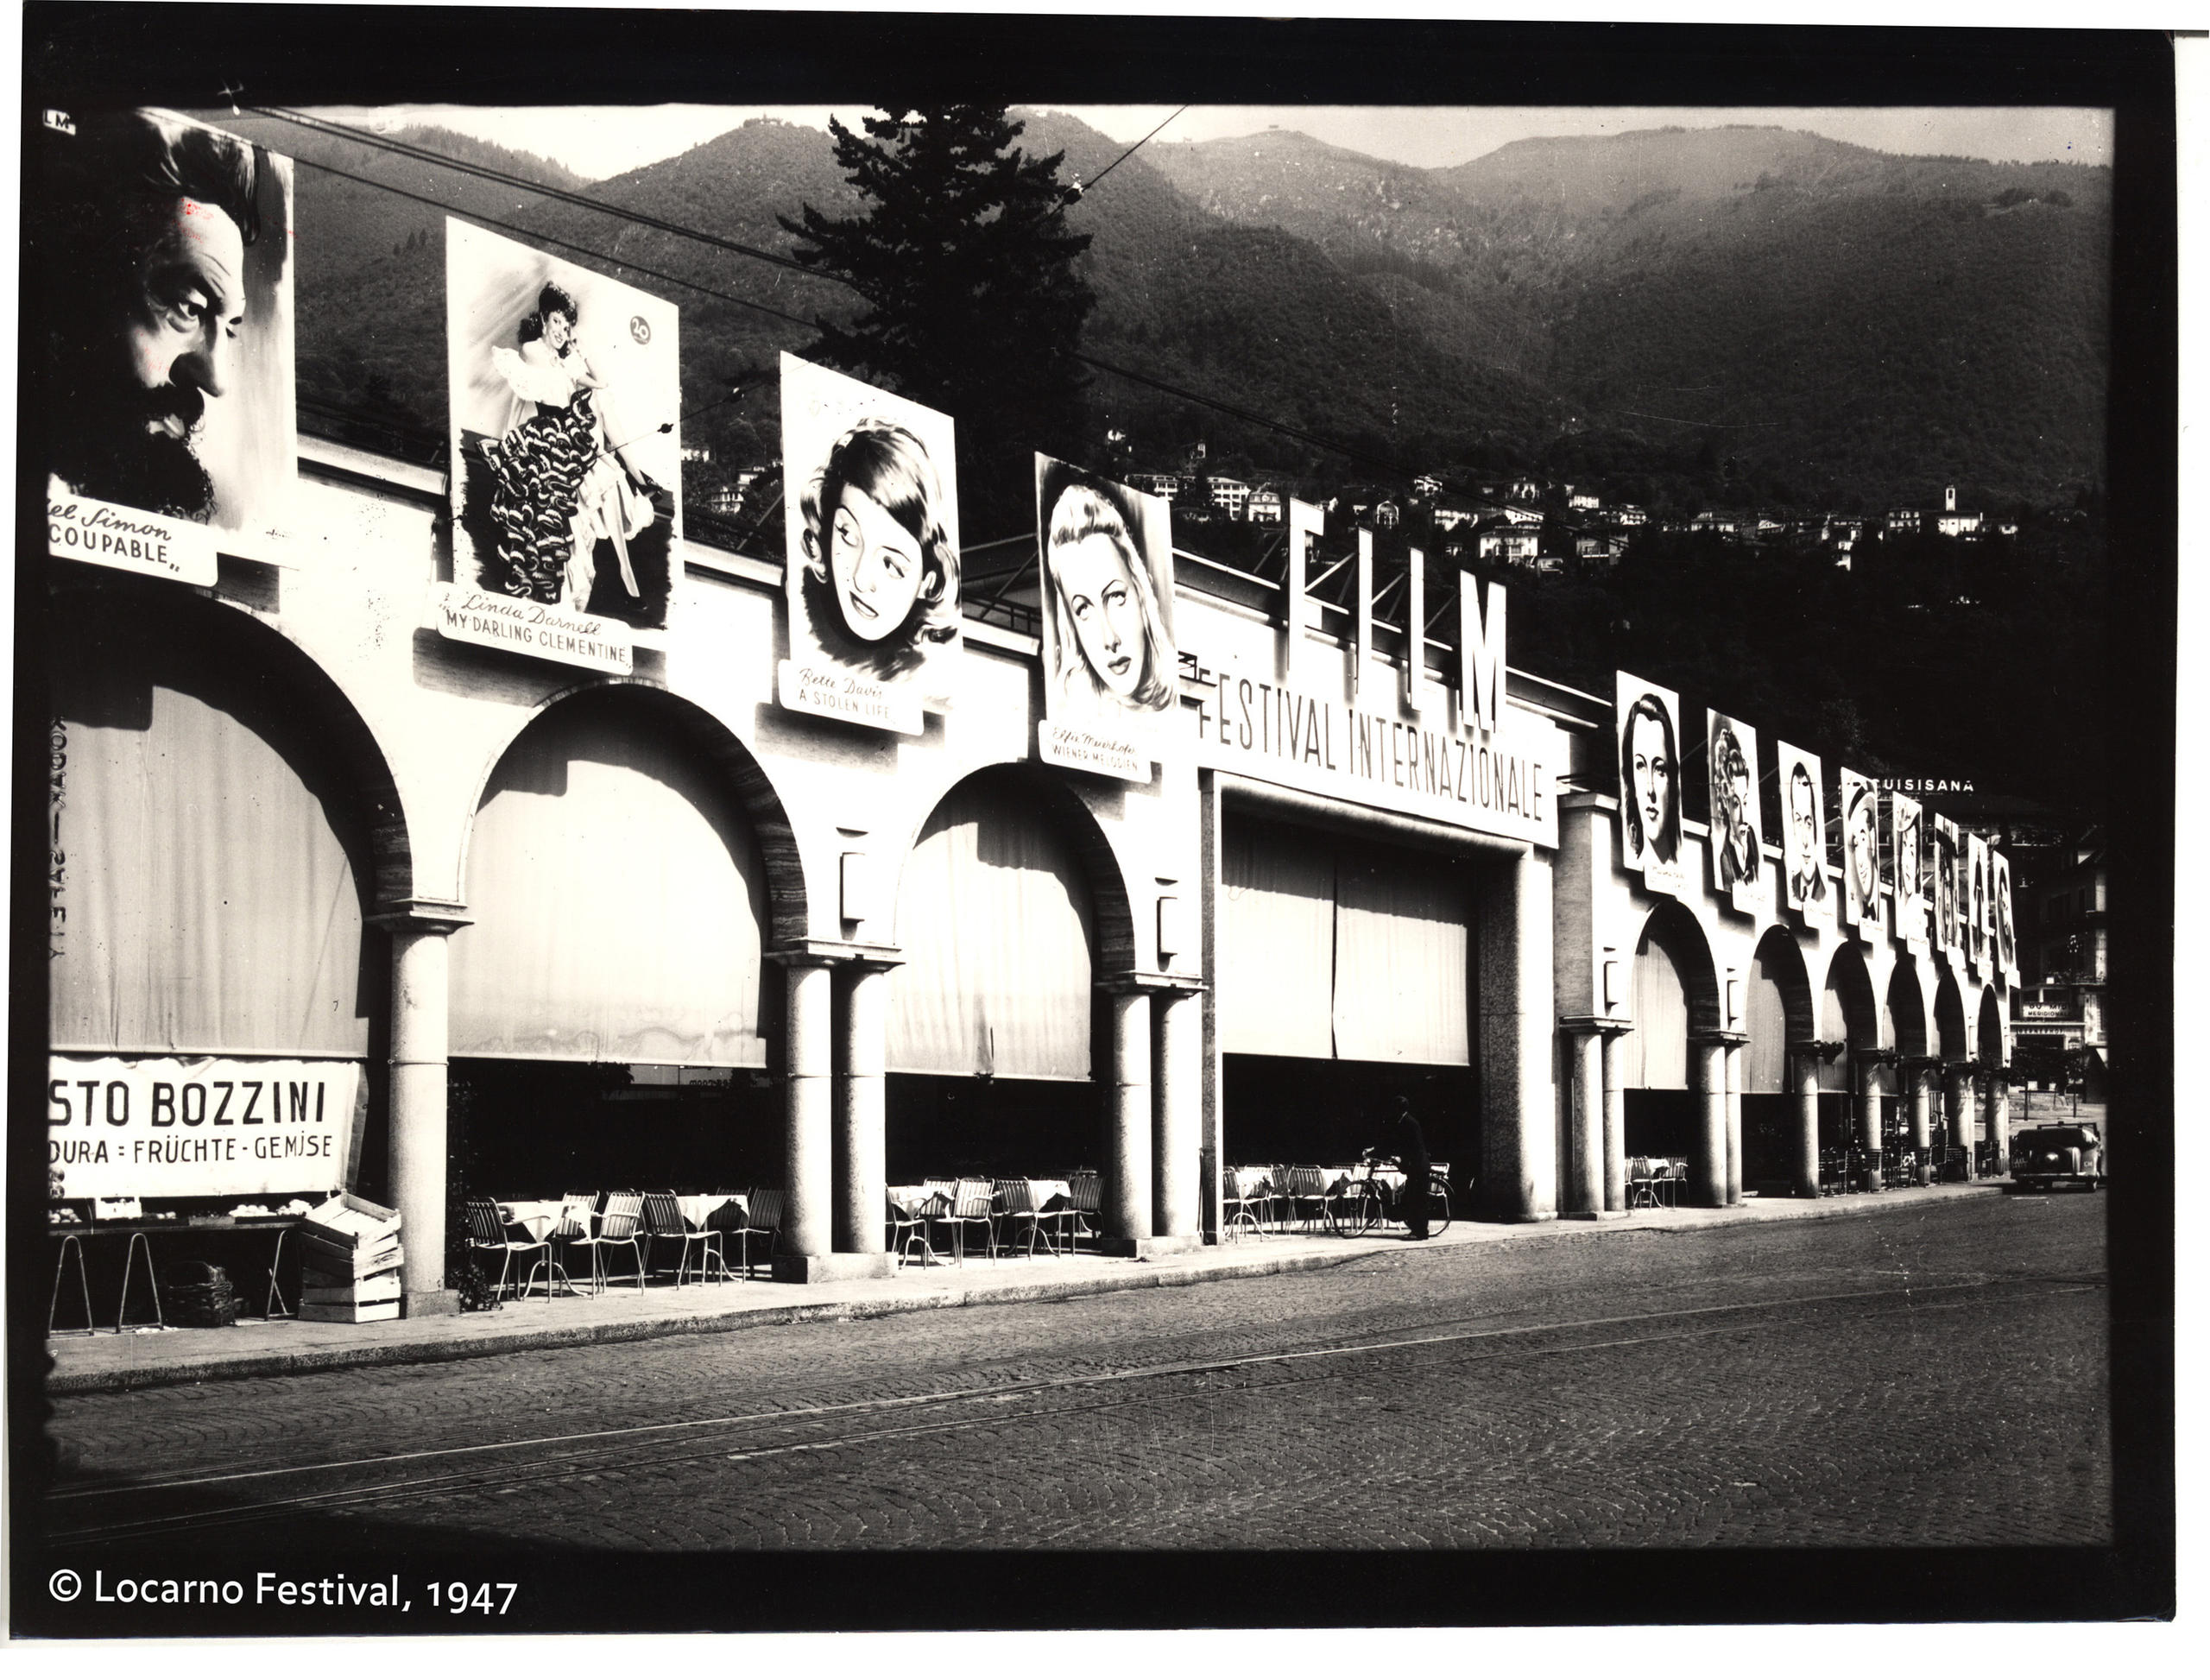 Film Festival 1947, posters with stars outside Locarno railway station